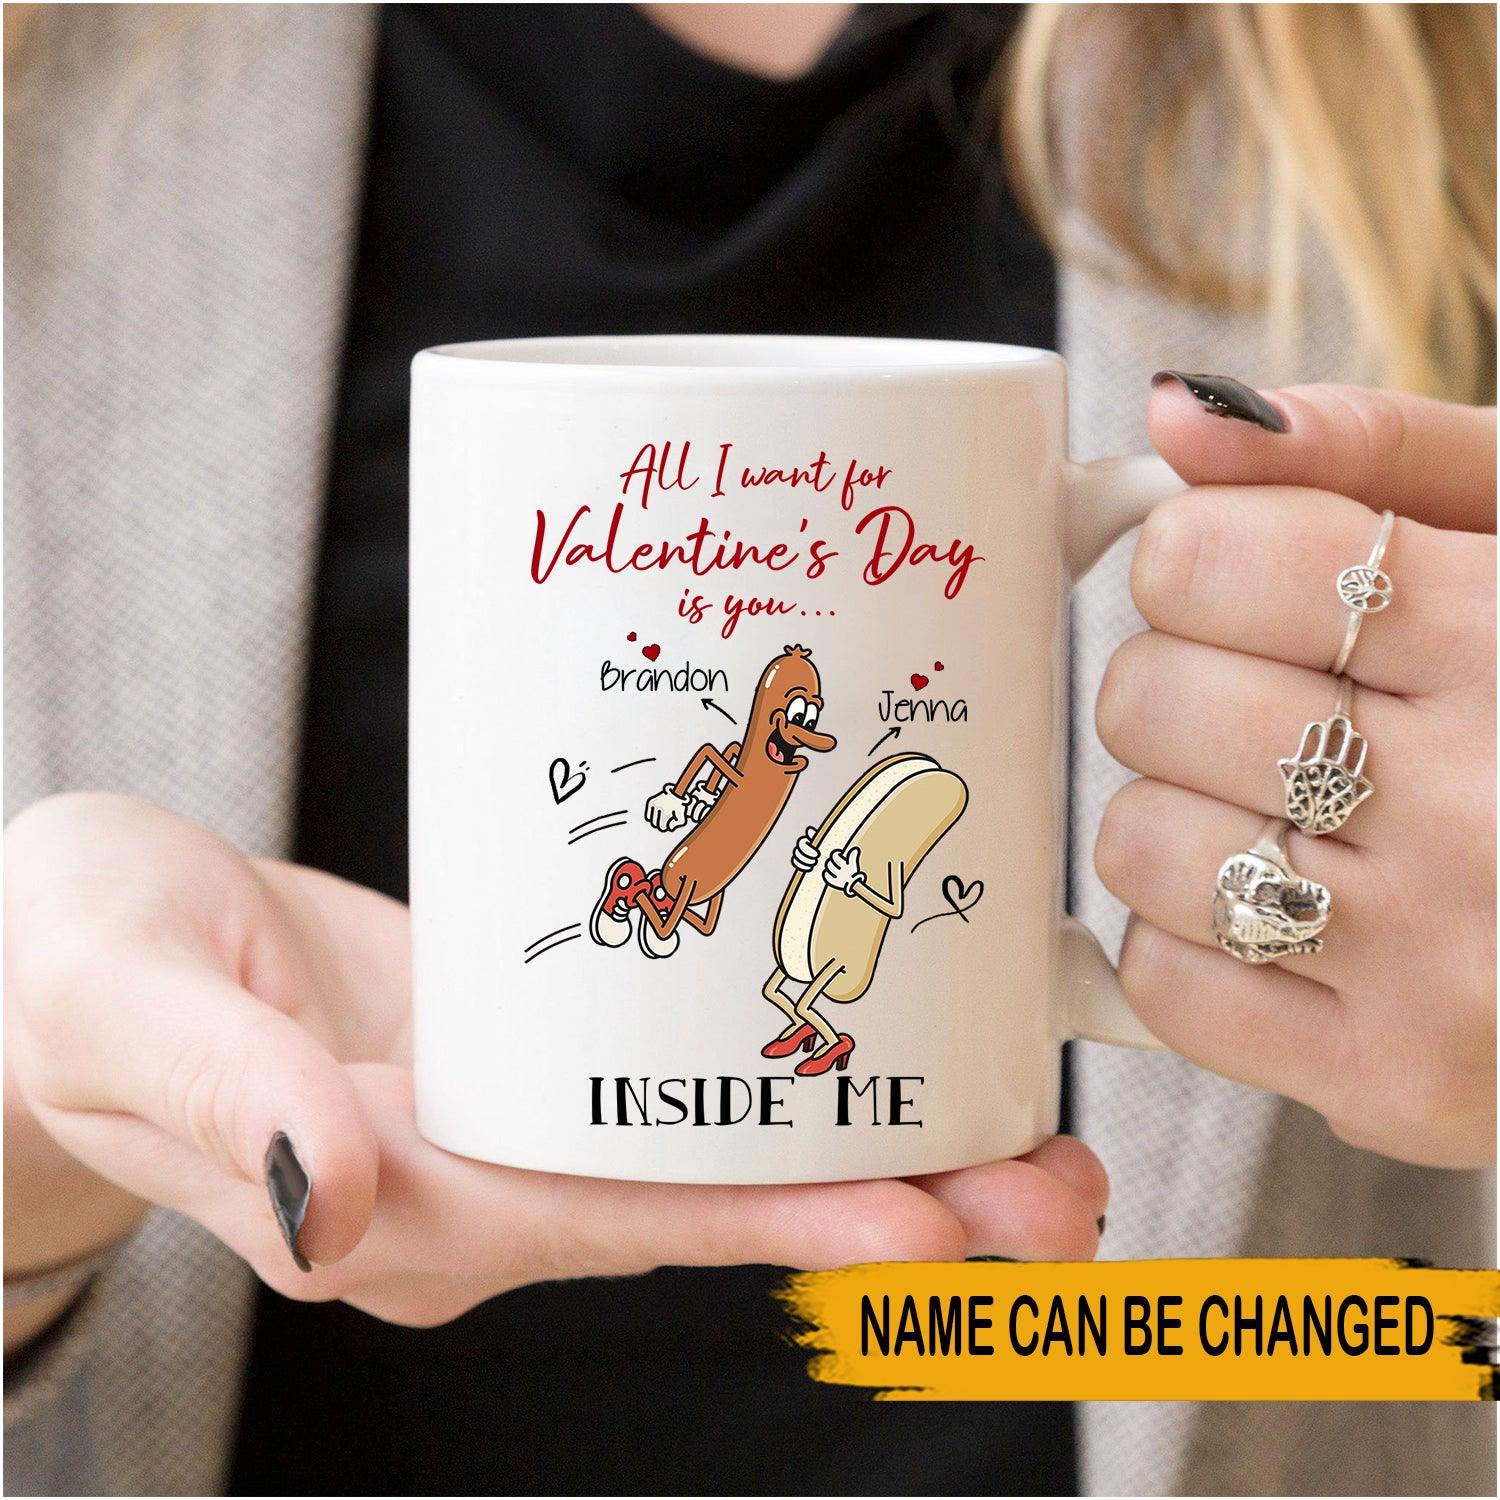 Personalized Family Mug All I Want For Valentines Day Is You Inside Me CTM One Size 11oz size Custom - Printyourwear